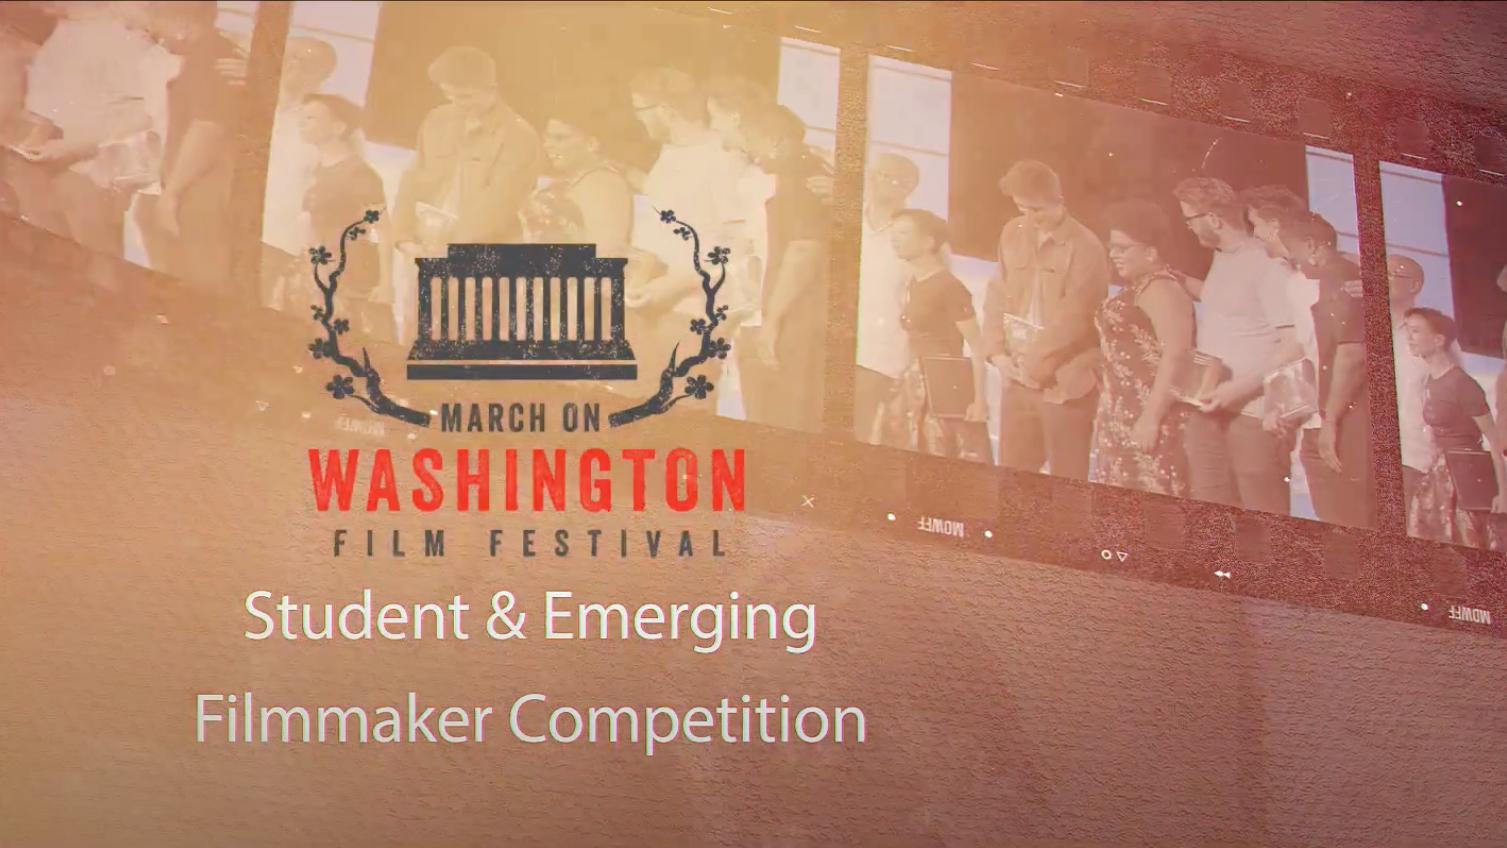 Emerging and Student Filmmaker Competition Roundtable: The Finalists